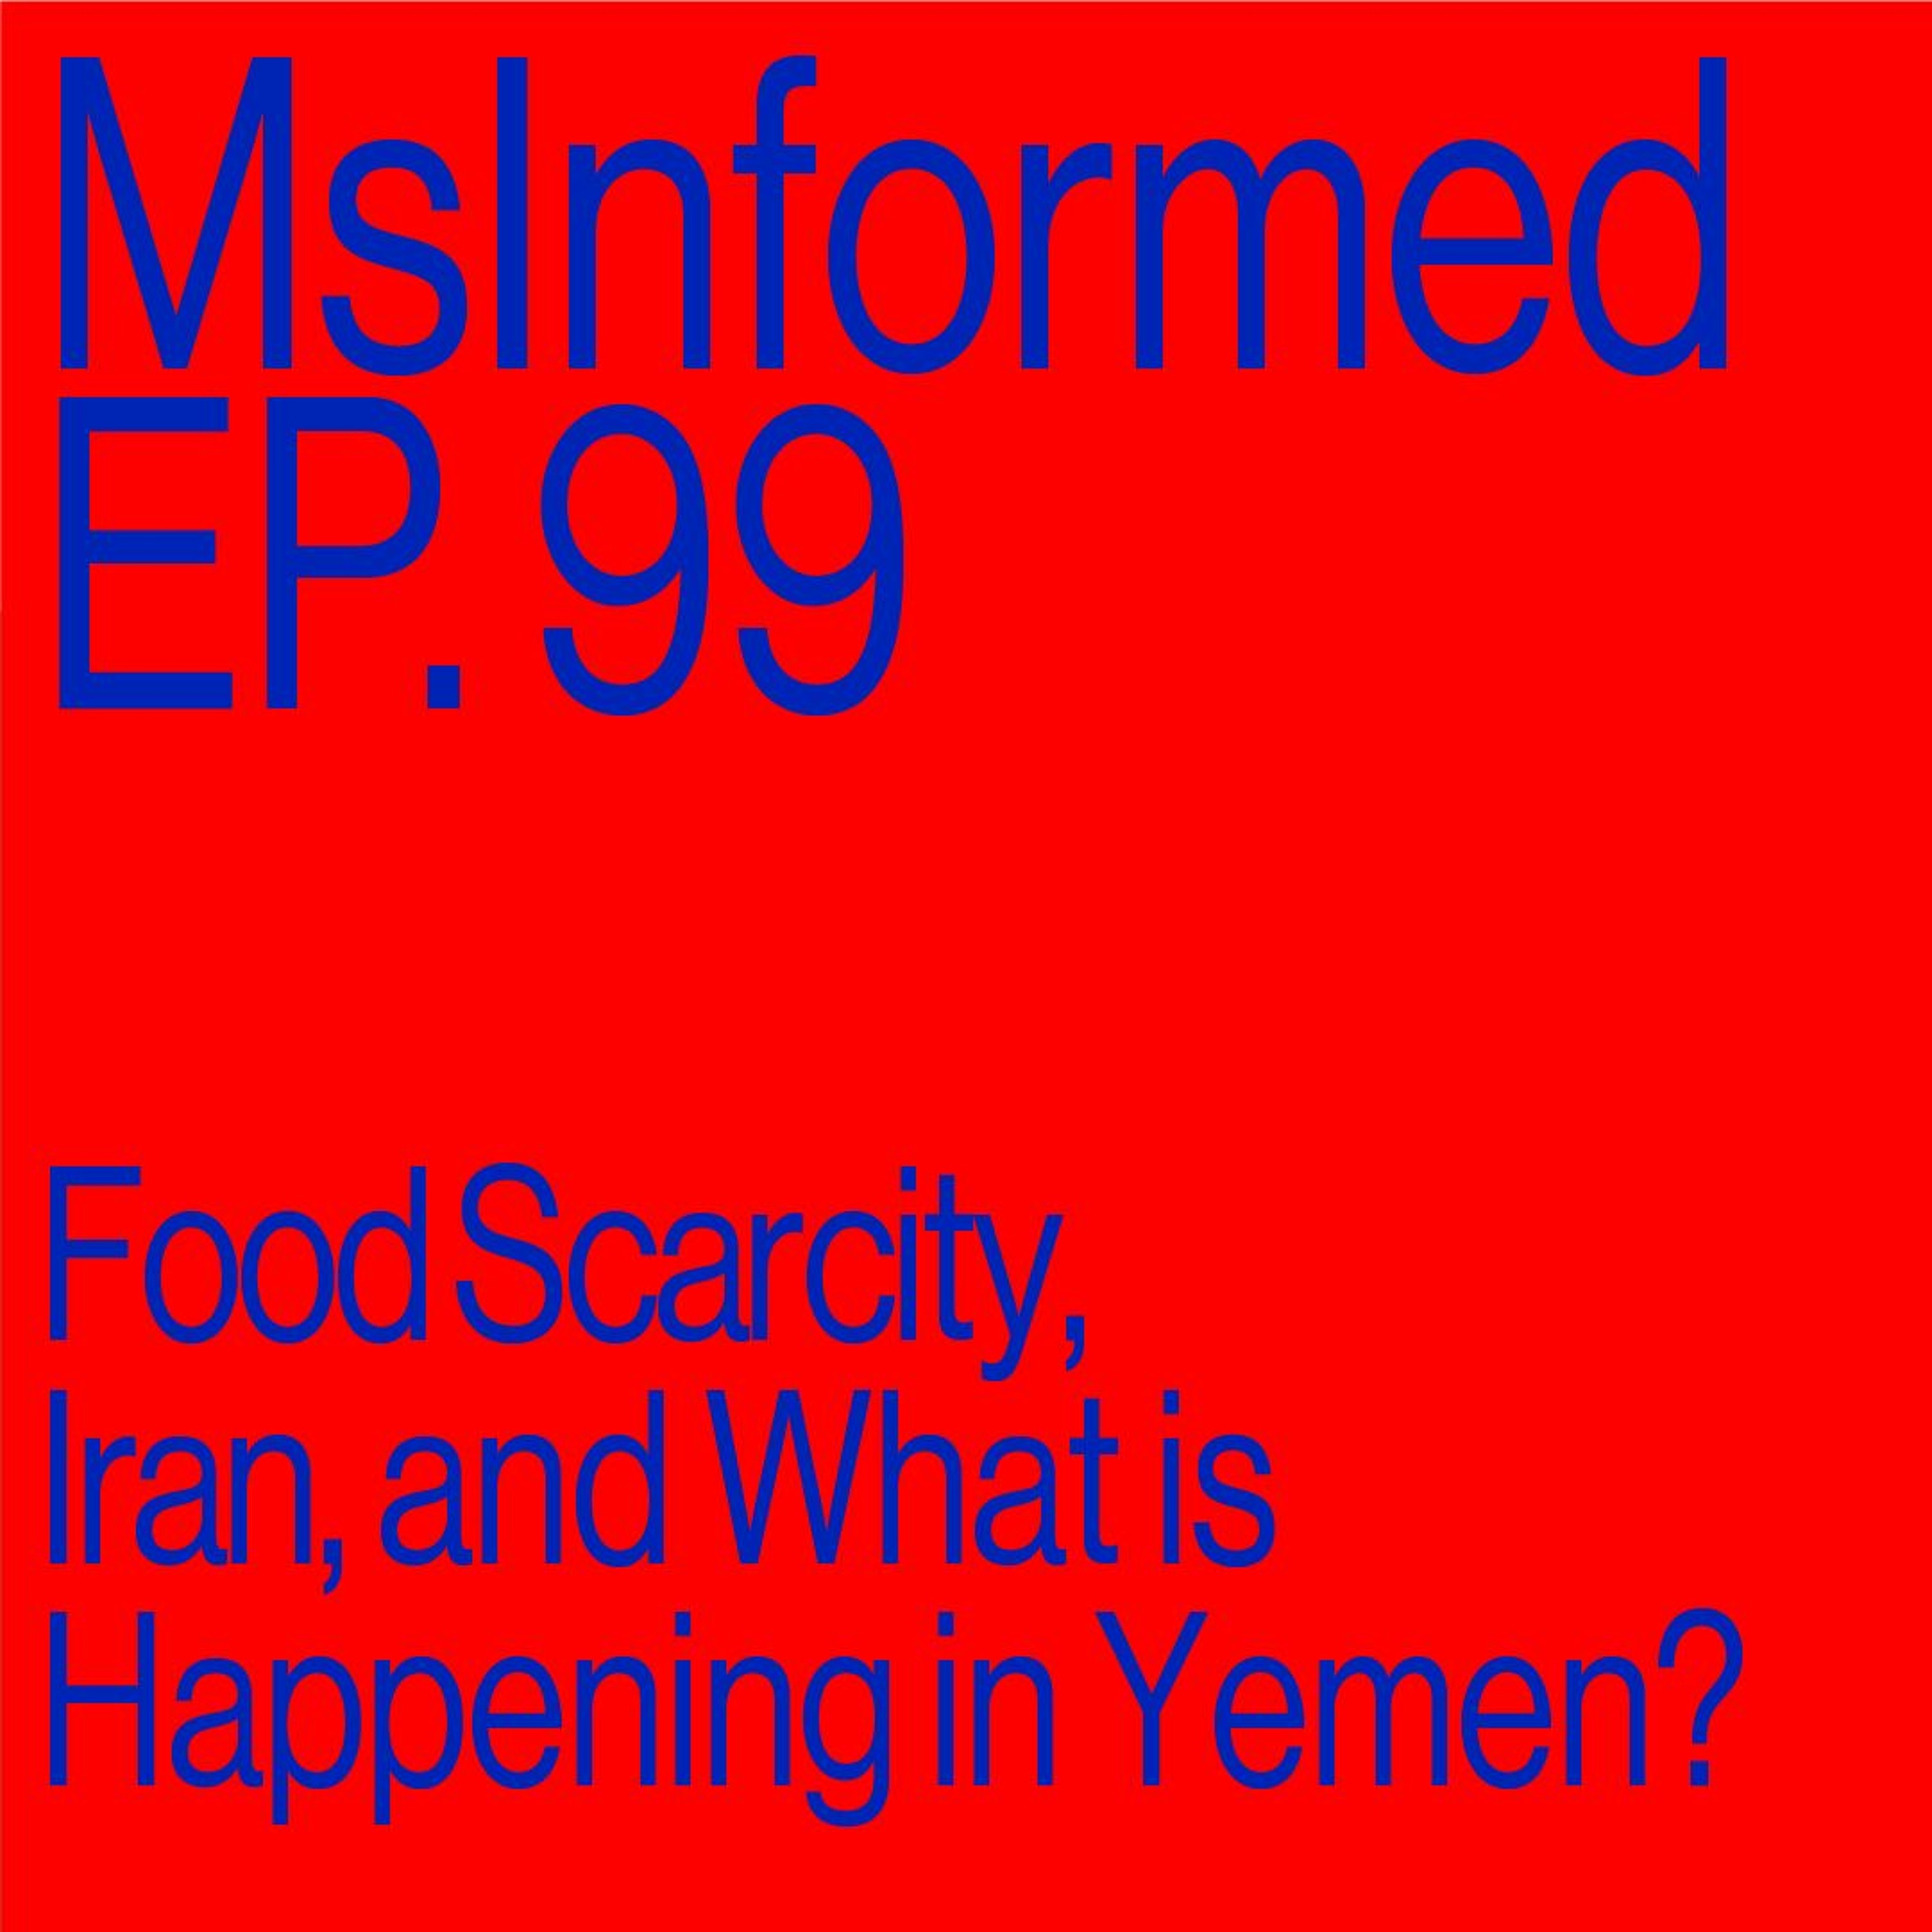 Episode 99: Food Scarcity, Iran, and What is Happening in Yemen?